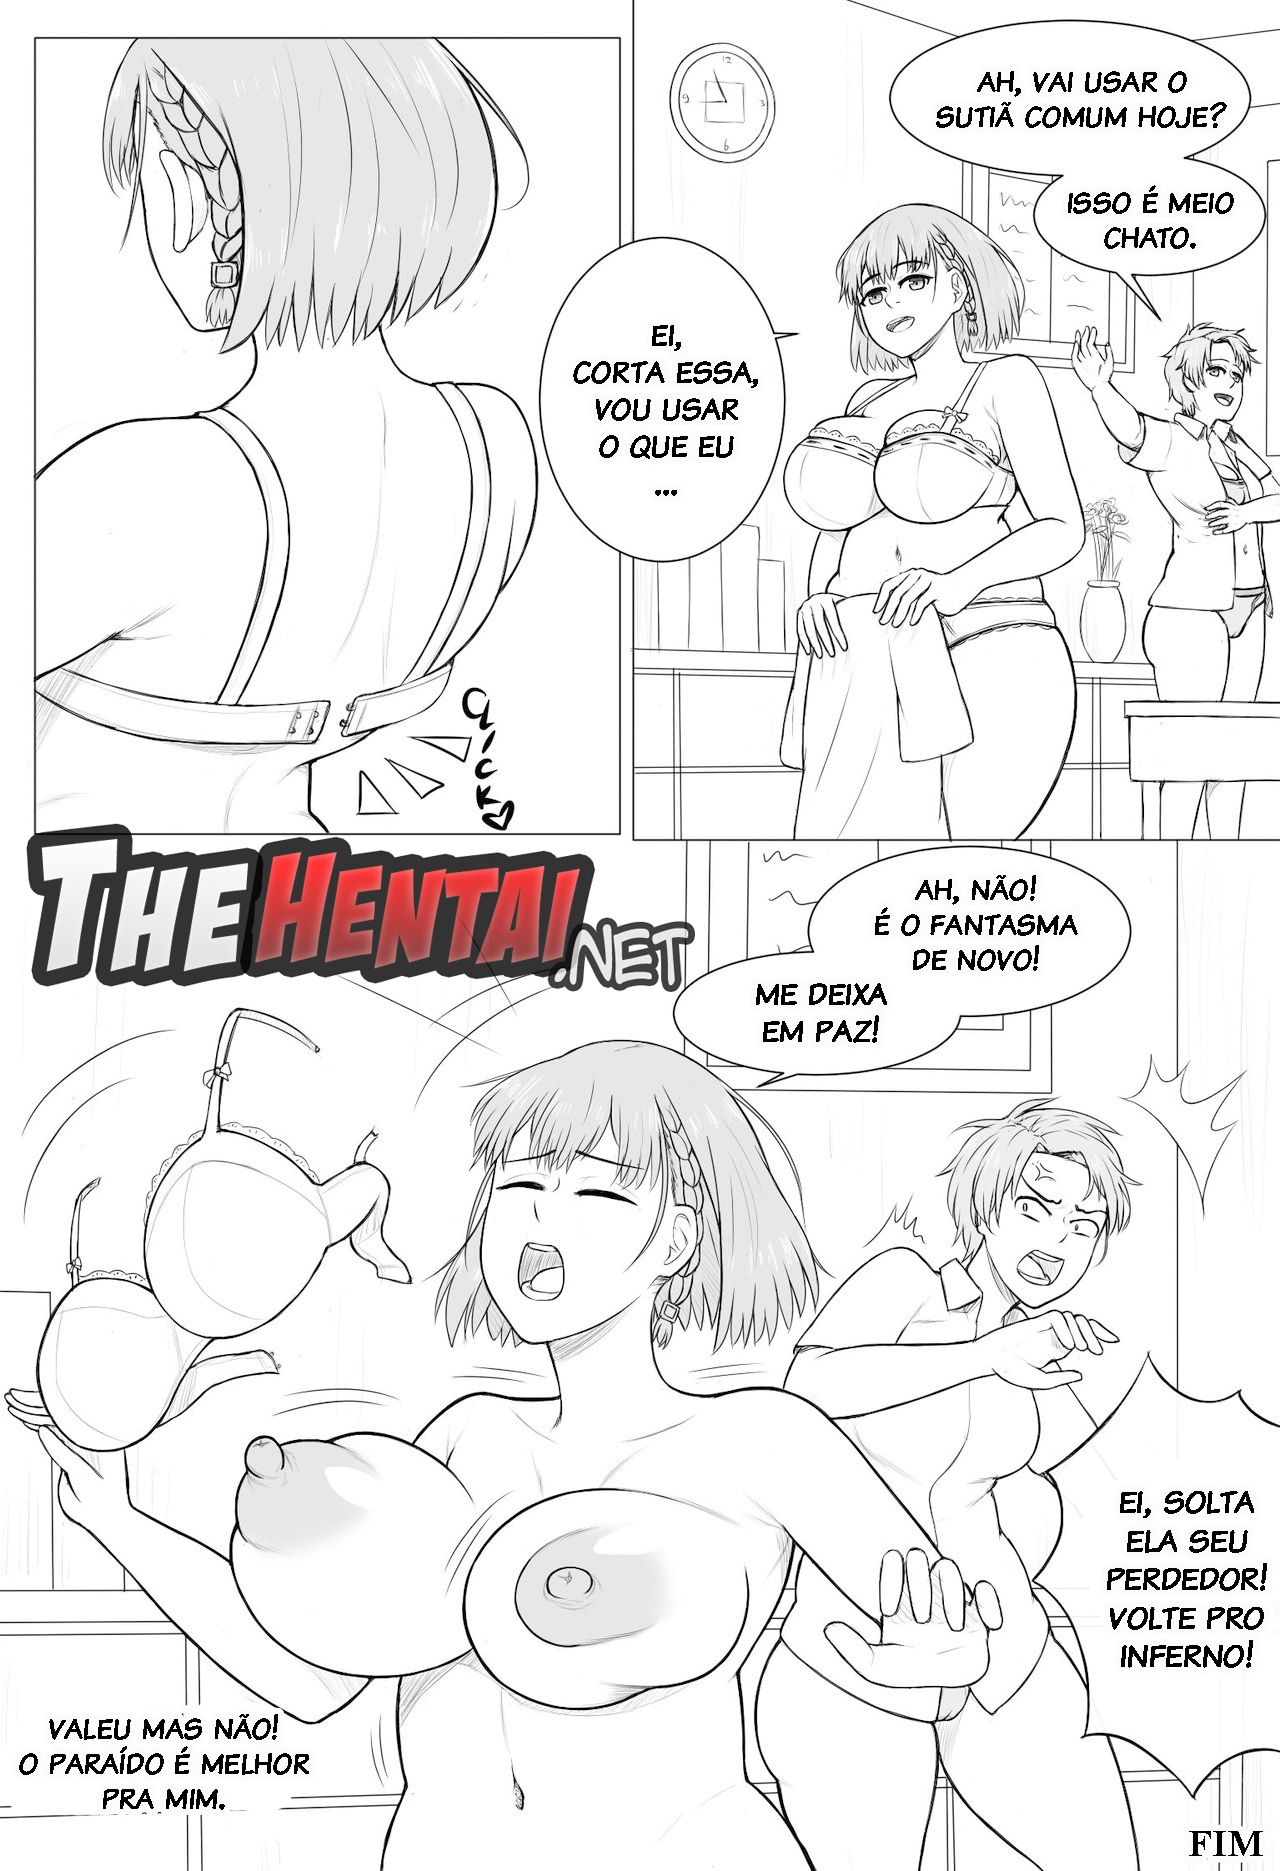 A Monday Night Haunting Hentai pt-br 08